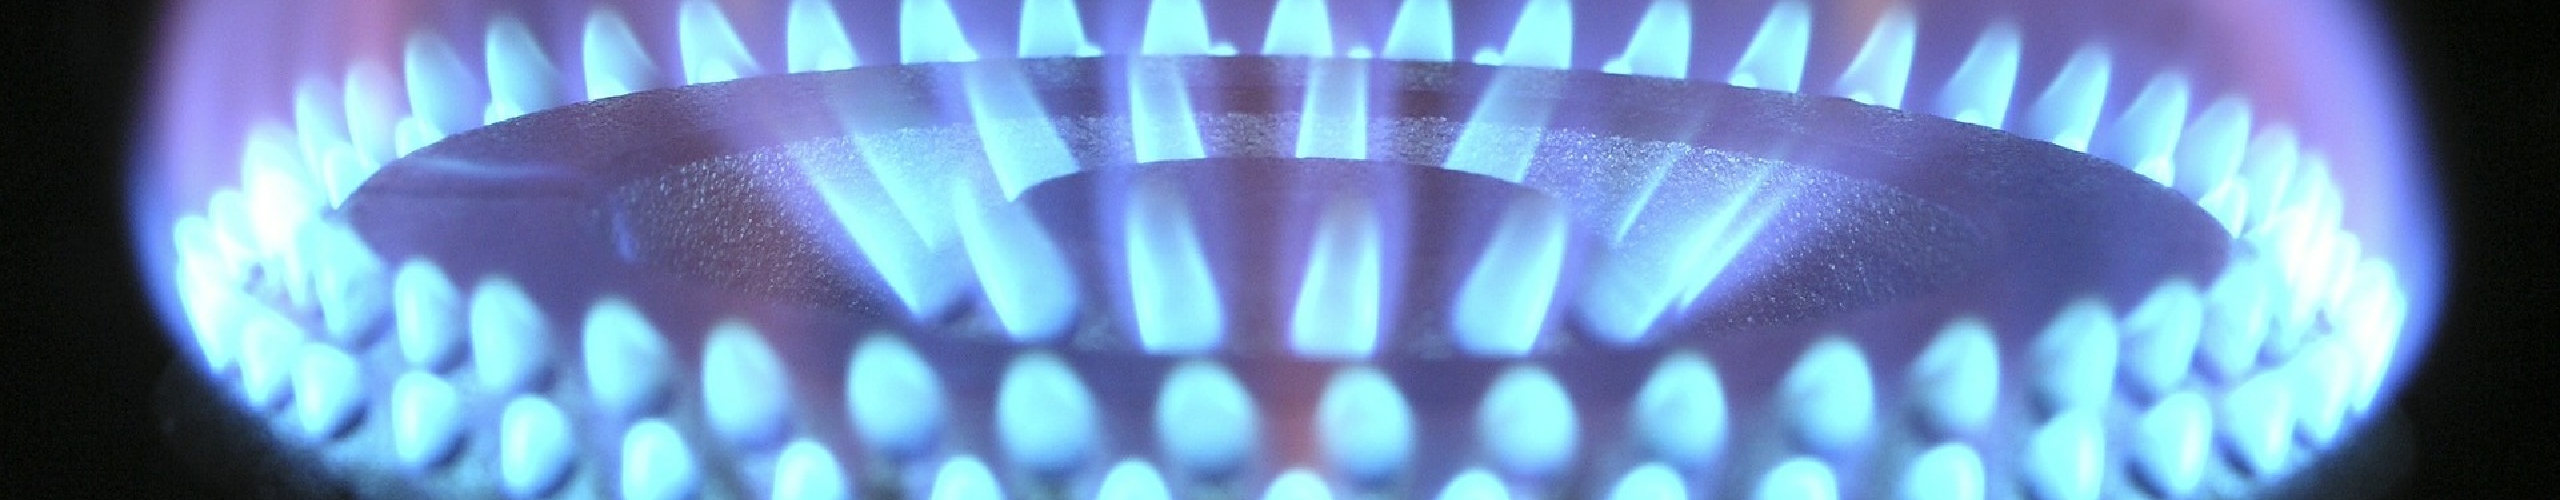 Gas flame panel background